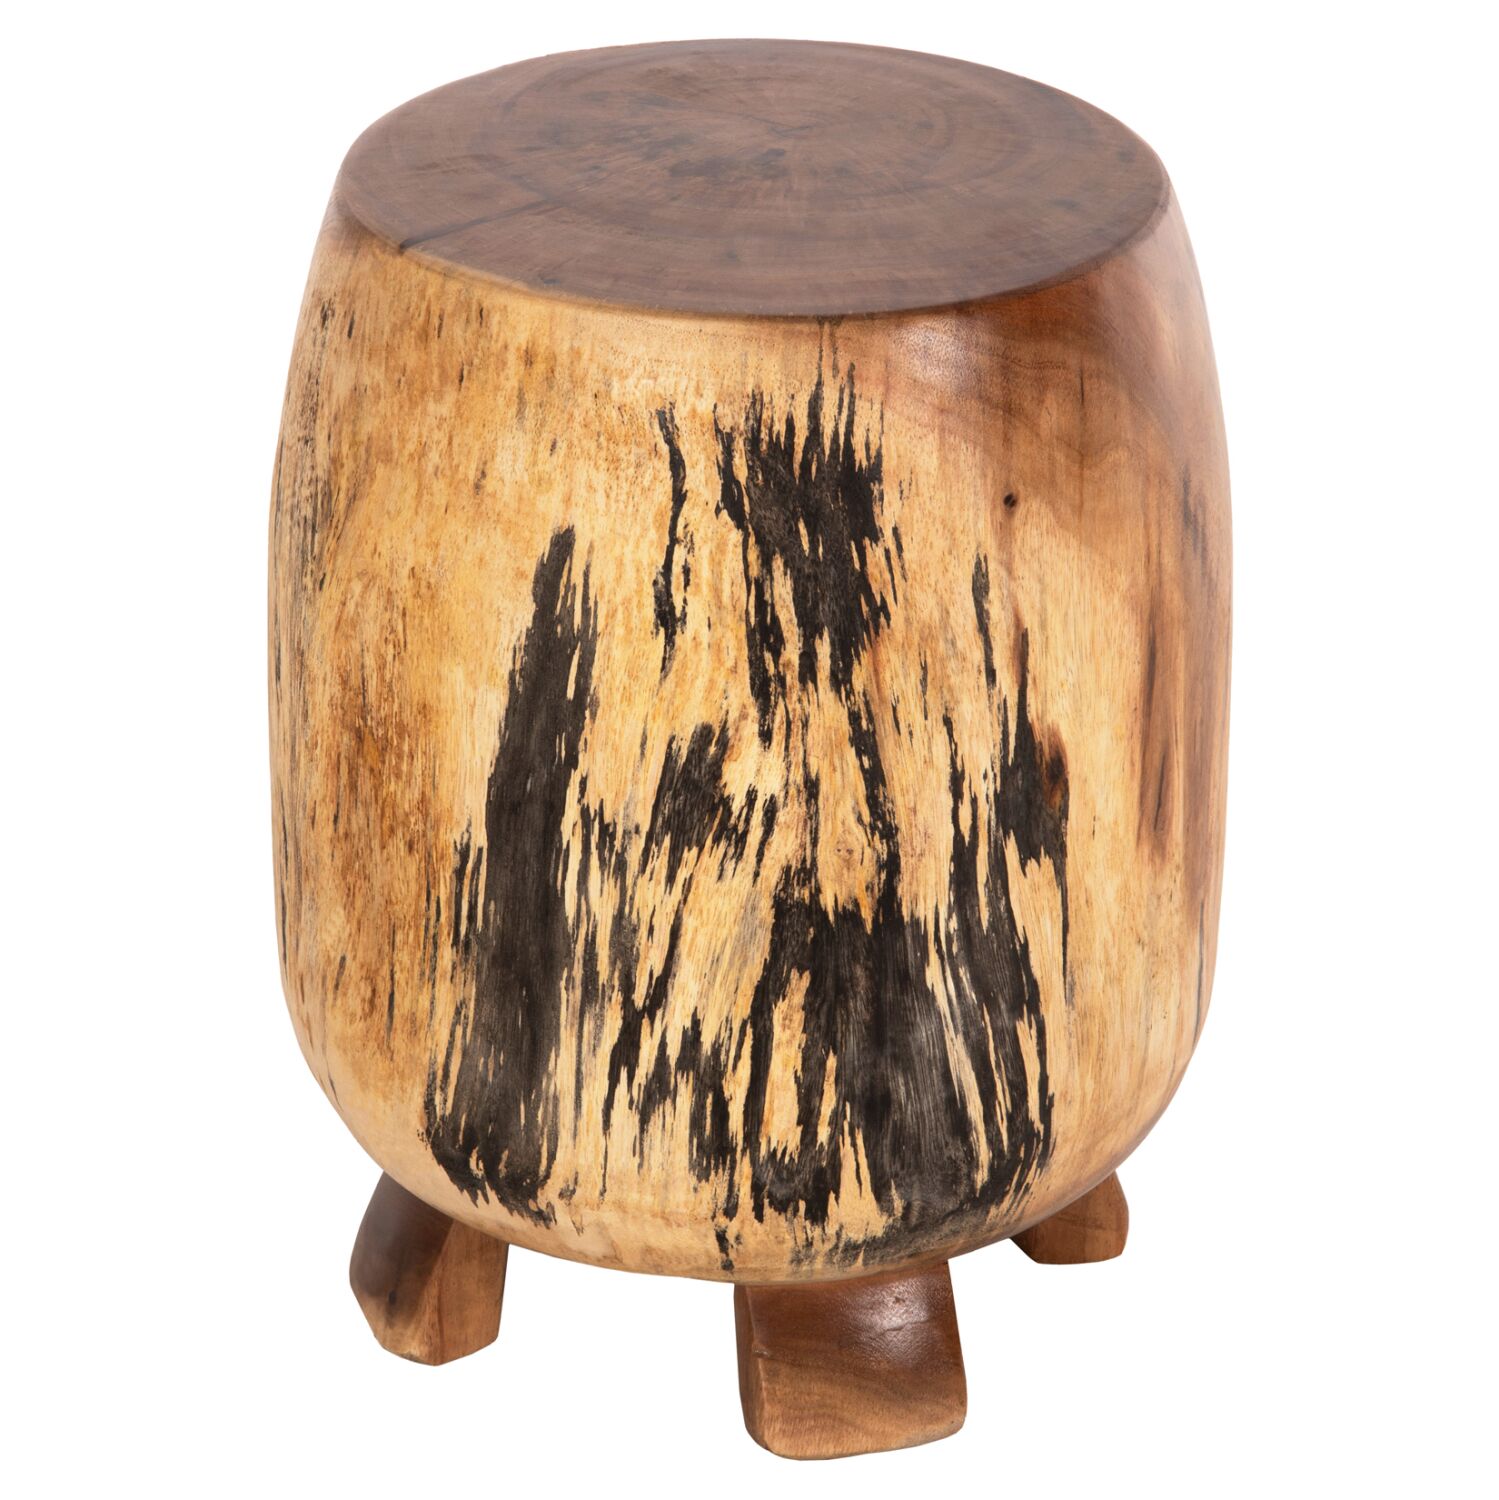 SIDE STOOL BOZZO HM9762 SUAR WOOD IN NATURAL Φ34x46Hcm.